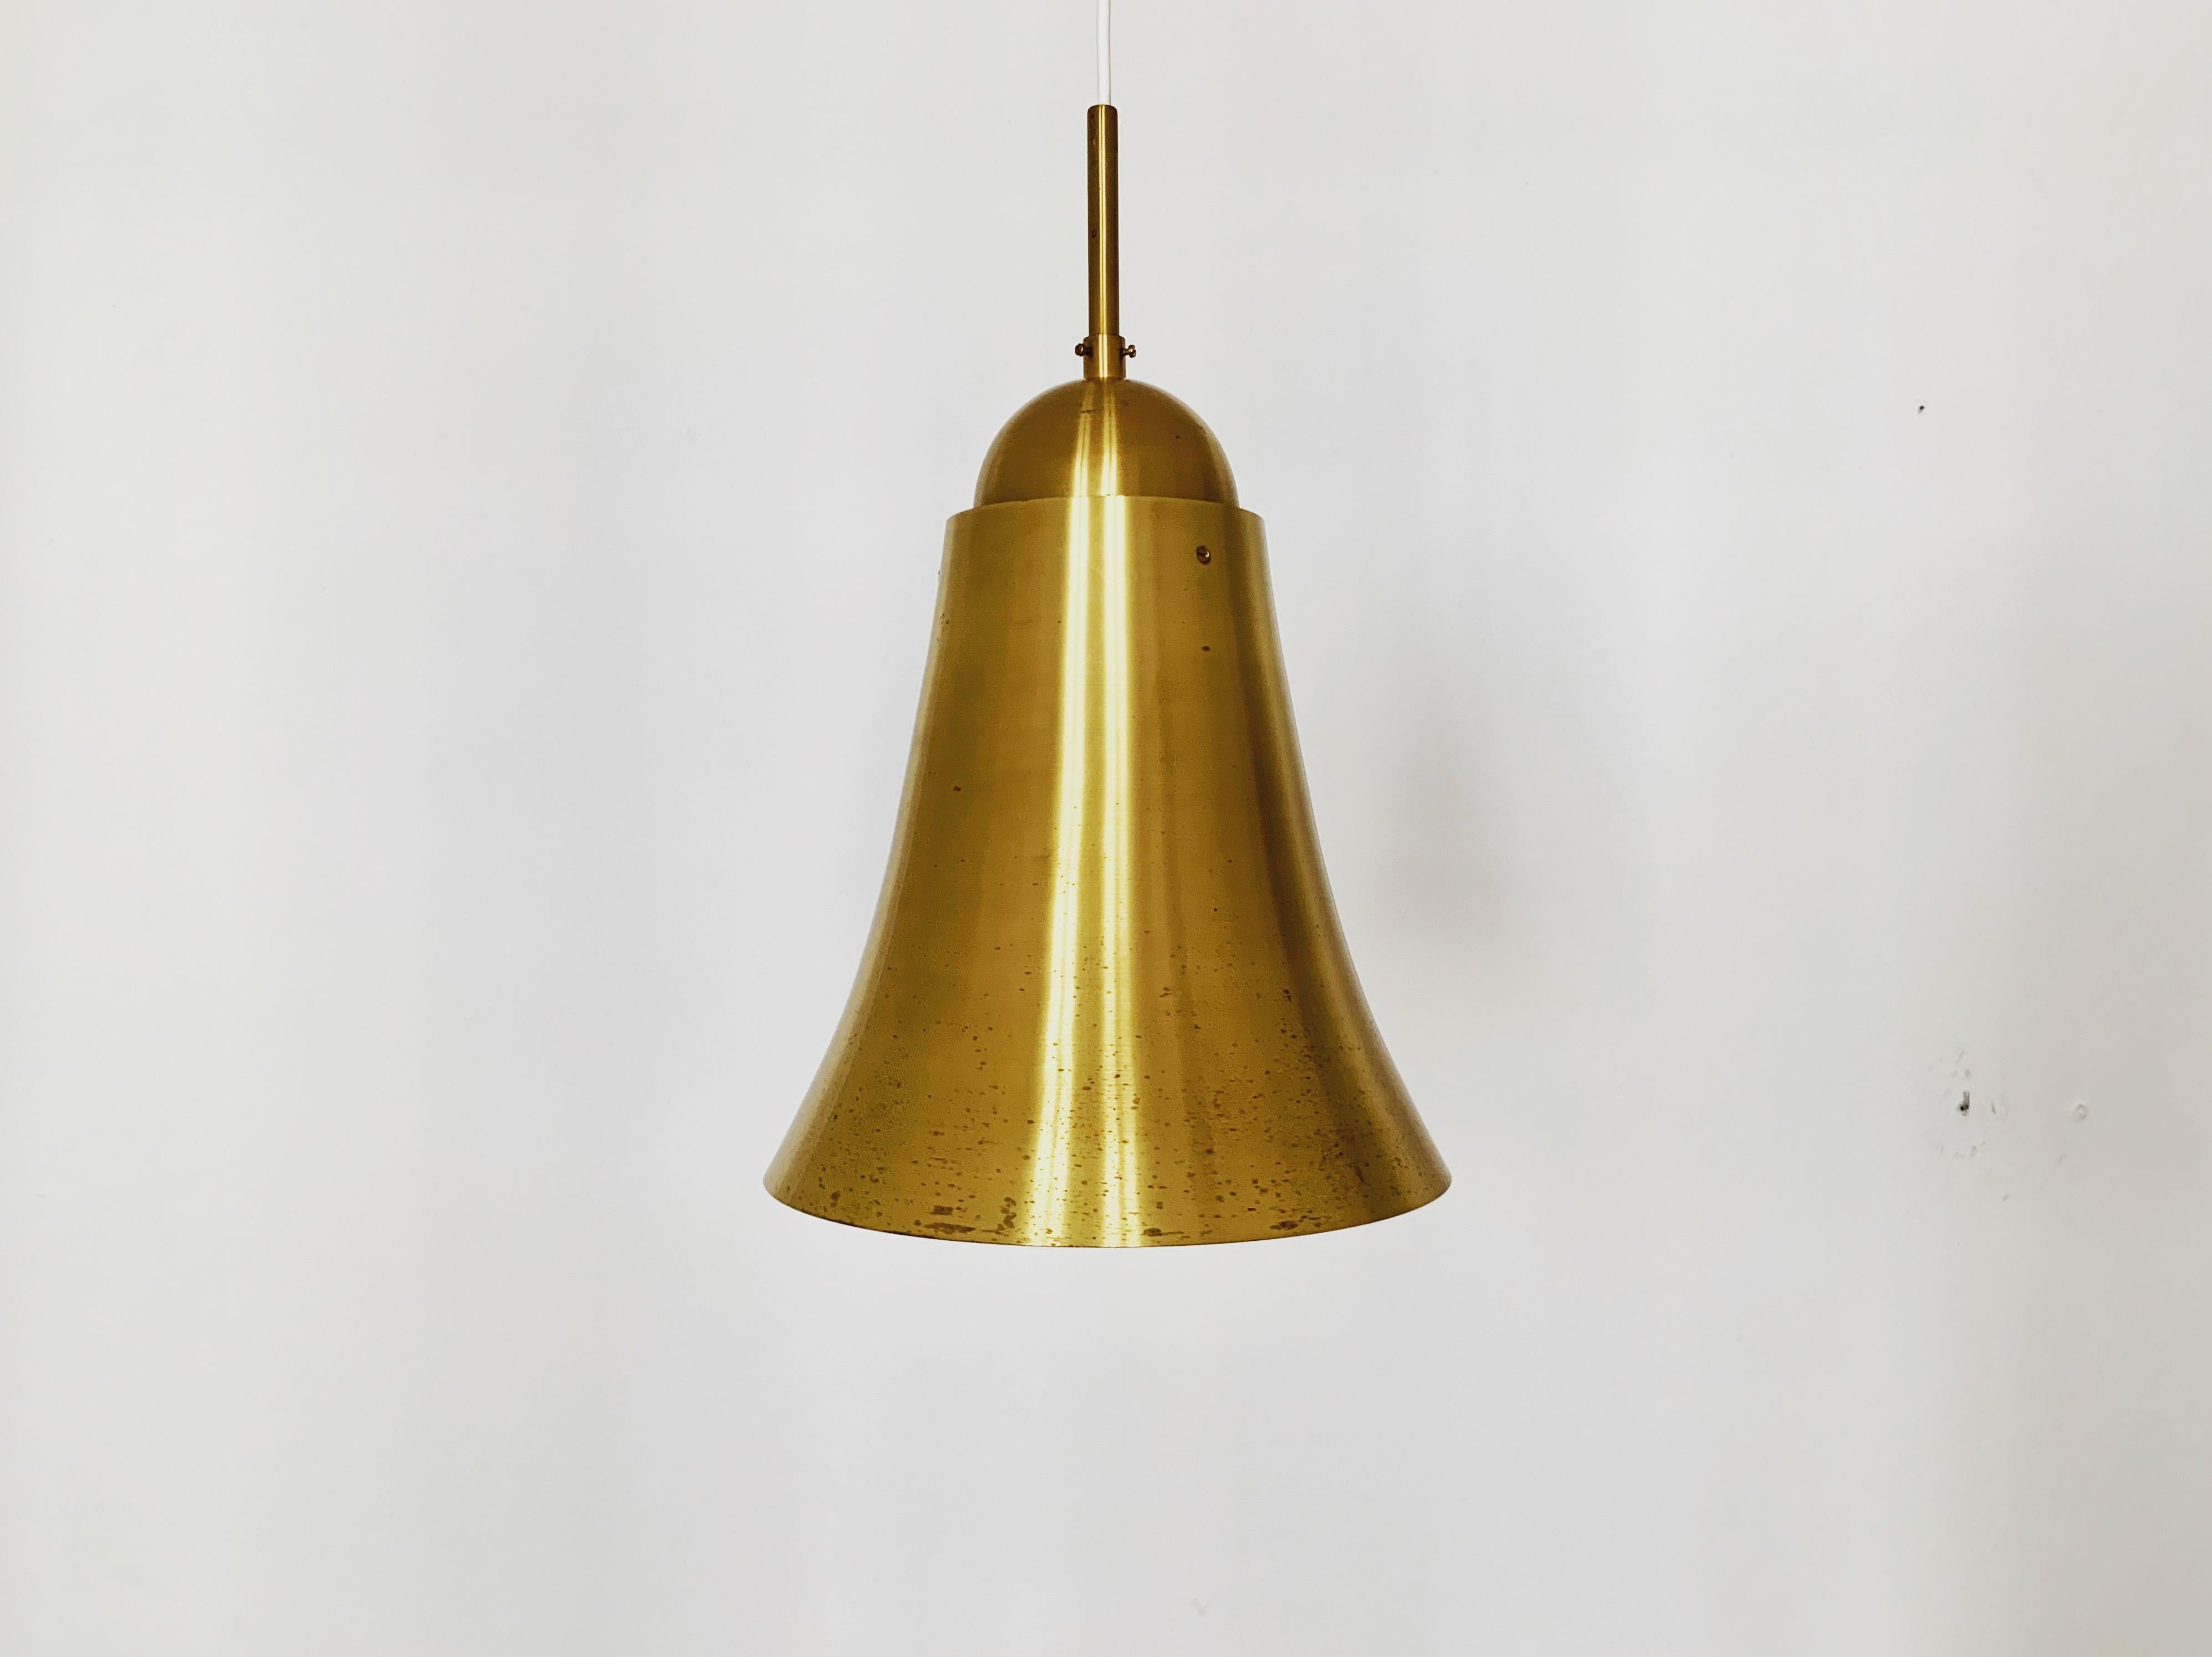 Very nice and large bell-shaped brass pendant lamp from the 1950s.
The brass creates a very warm and cozy light.
Solid workmanship and a real eye-catcher for every home.
There are a total of 5 lamps, all of which have a slightly different